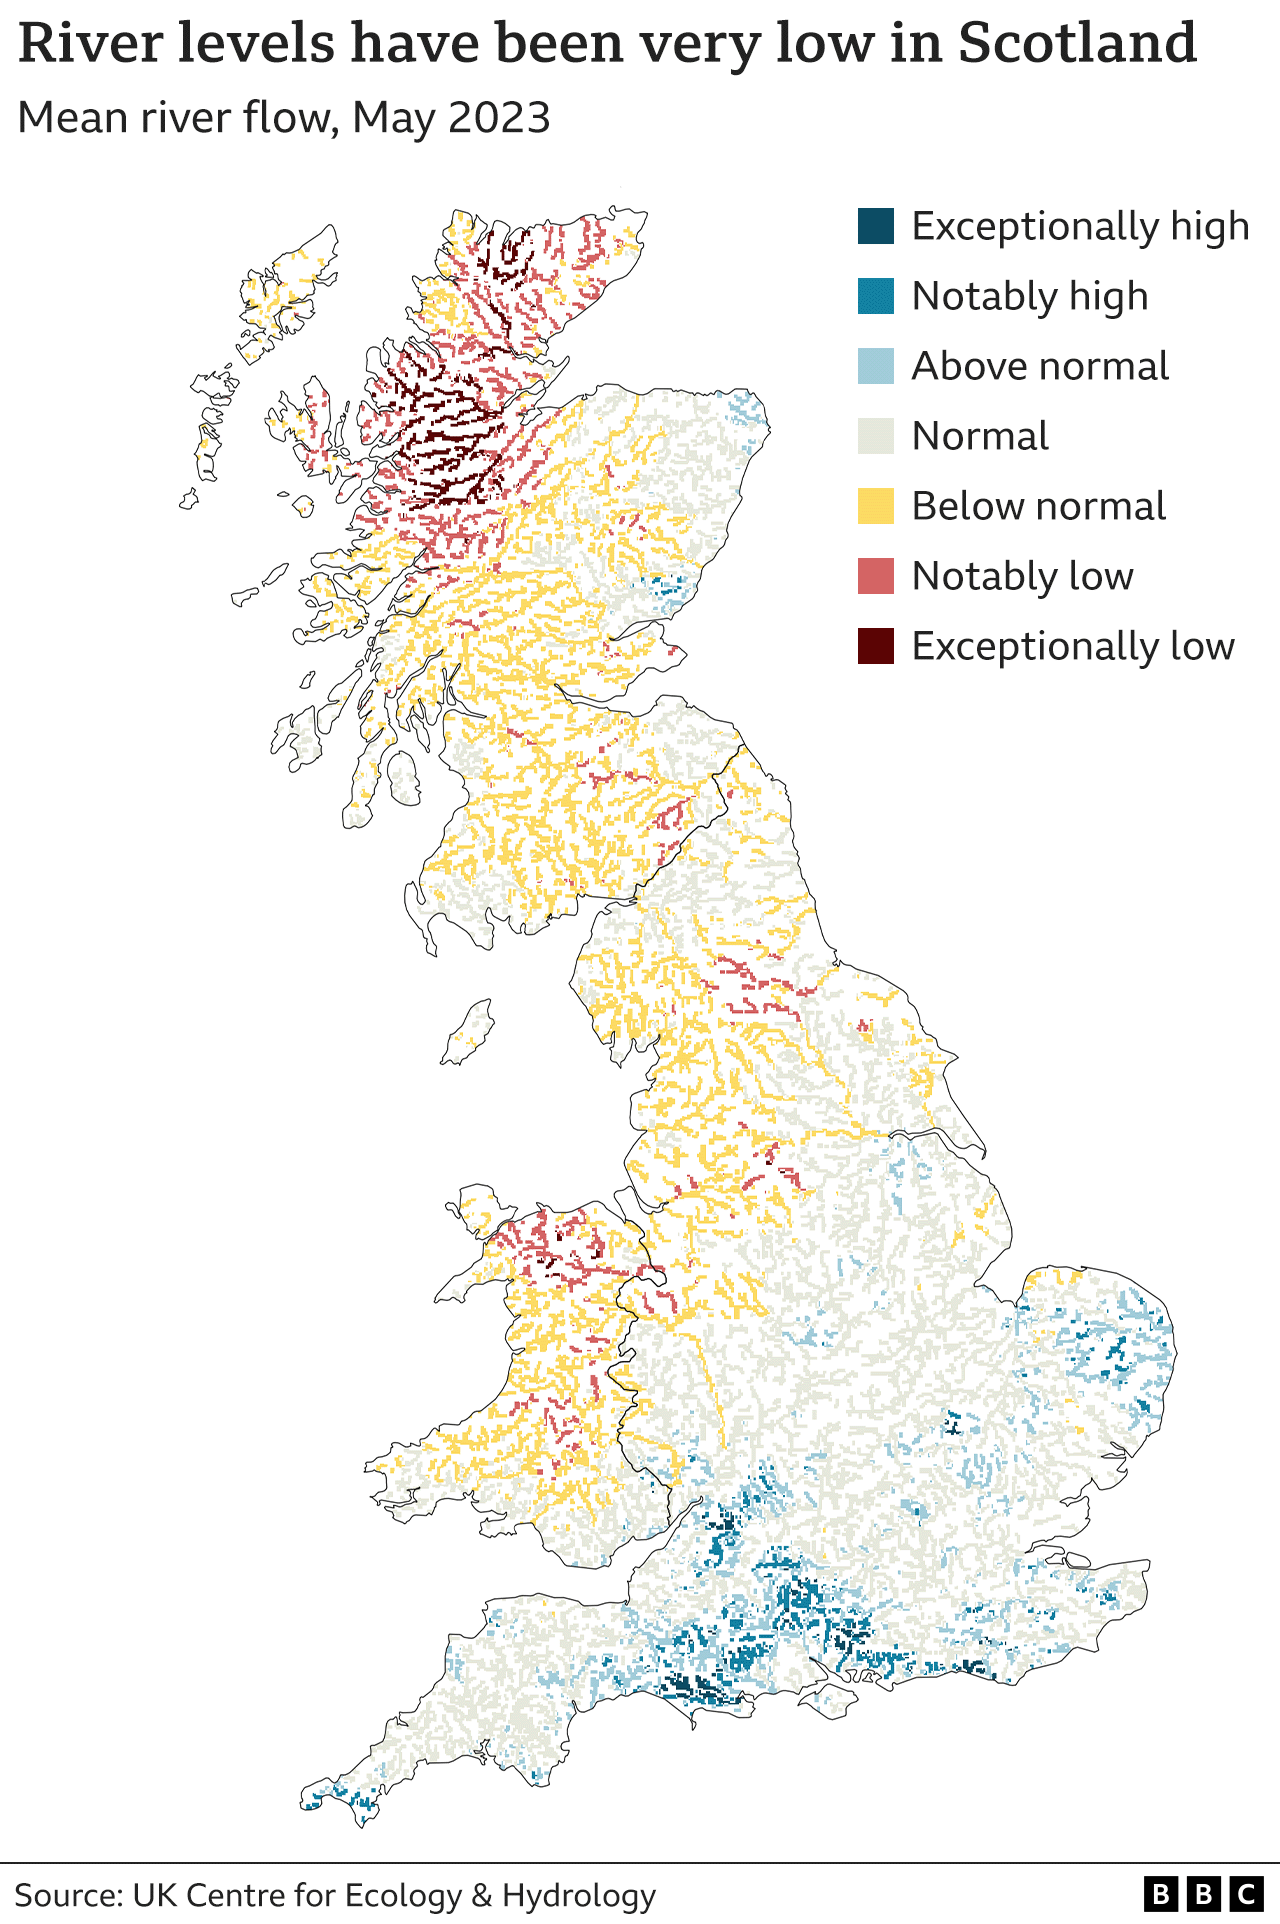 Map showing that river flows were very low in Scotland in May, compared to higher river flows in the south of England